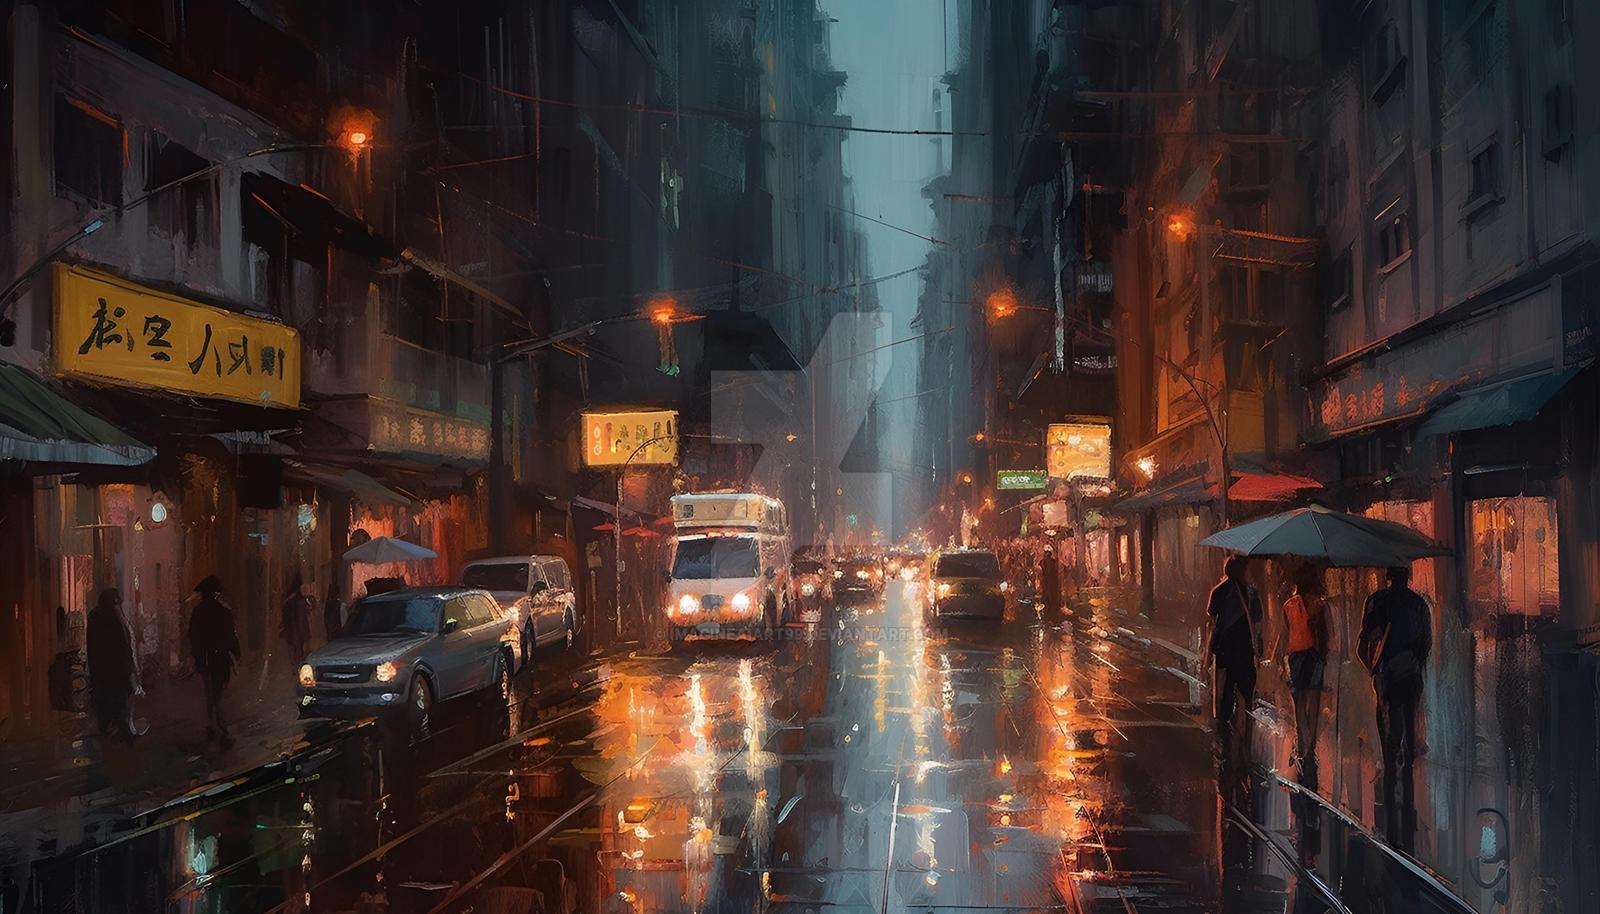 City Oil Painting By Imagineaiart99